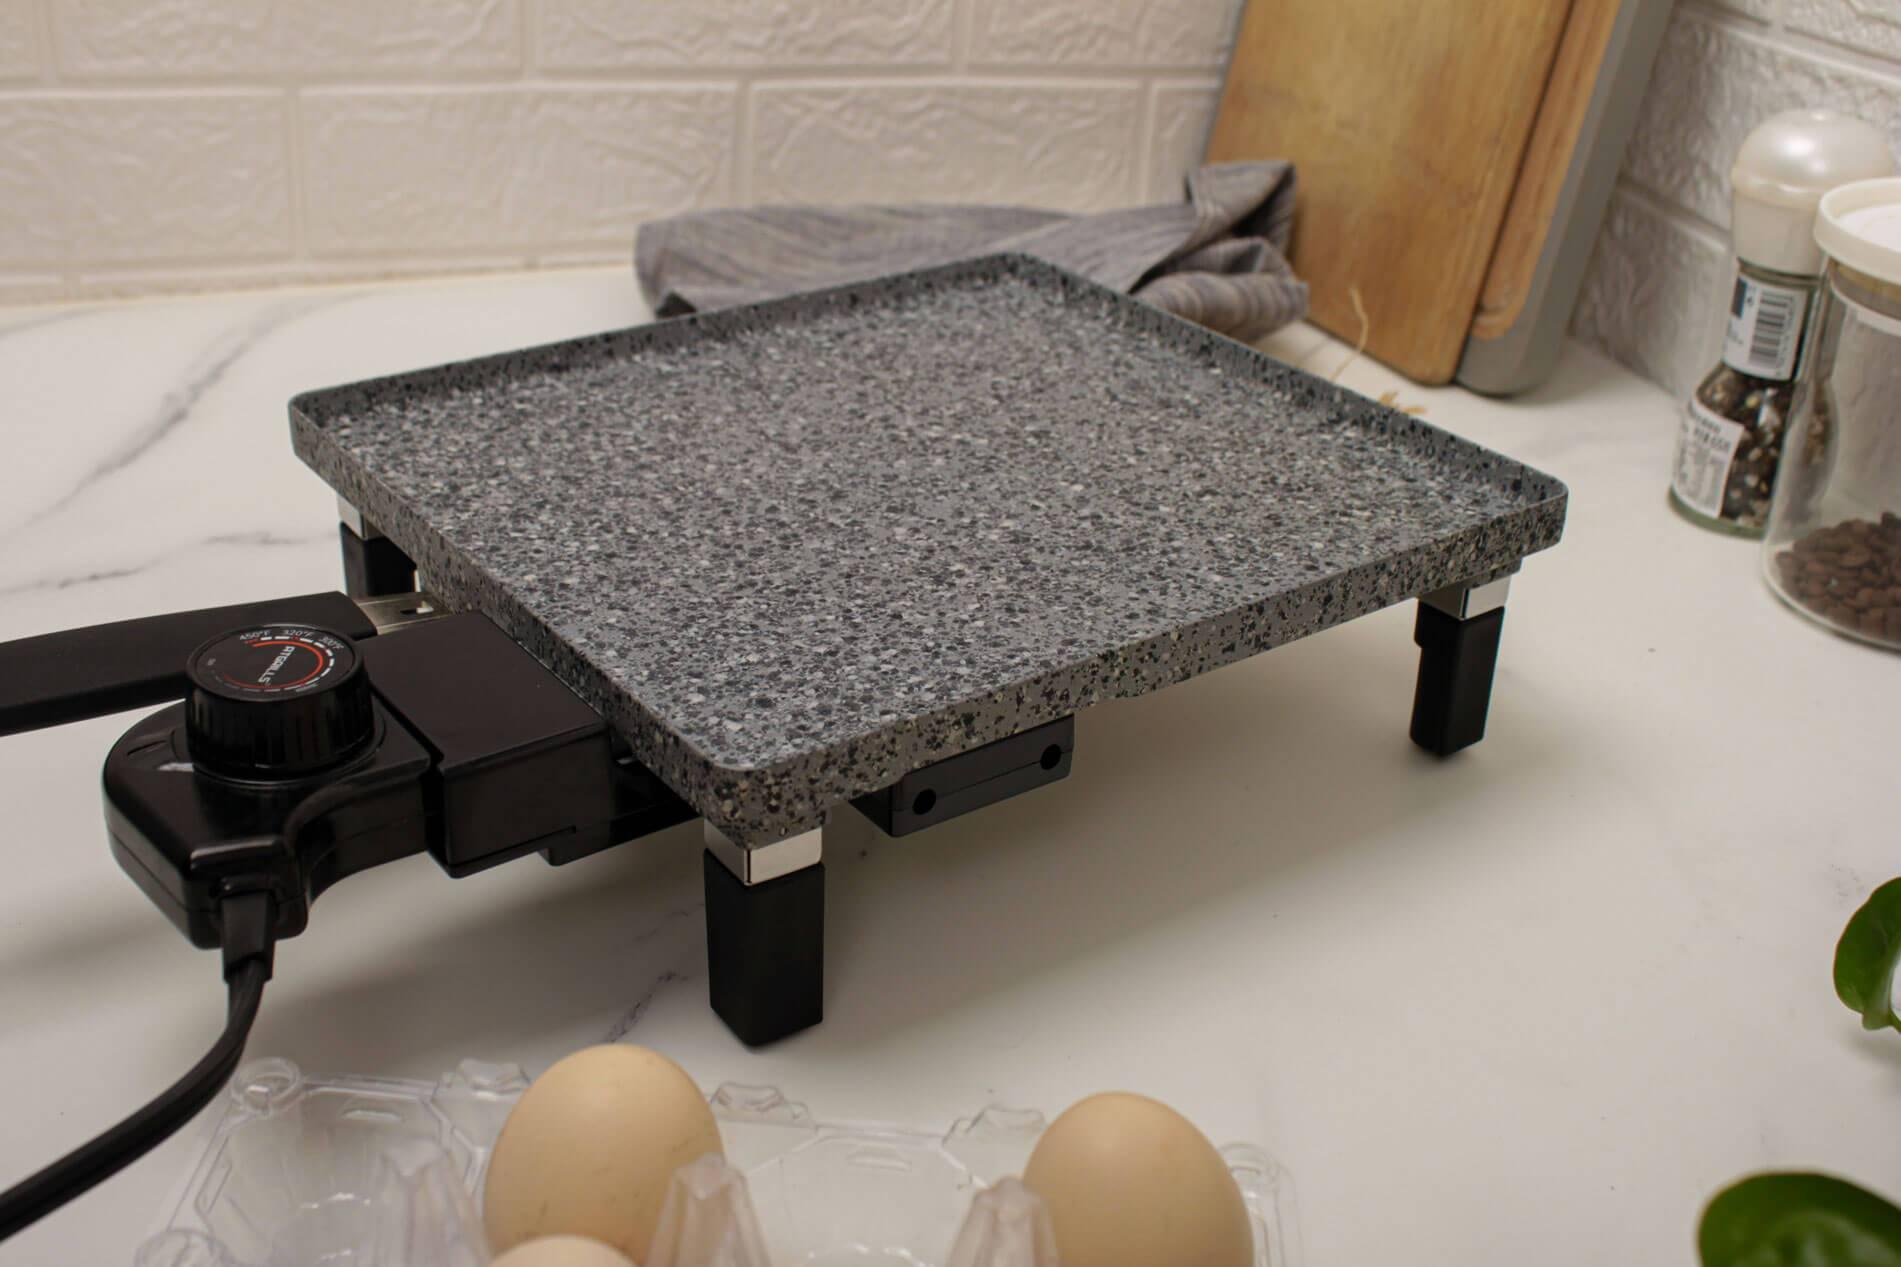 electric griddle pan with maifan stone coating